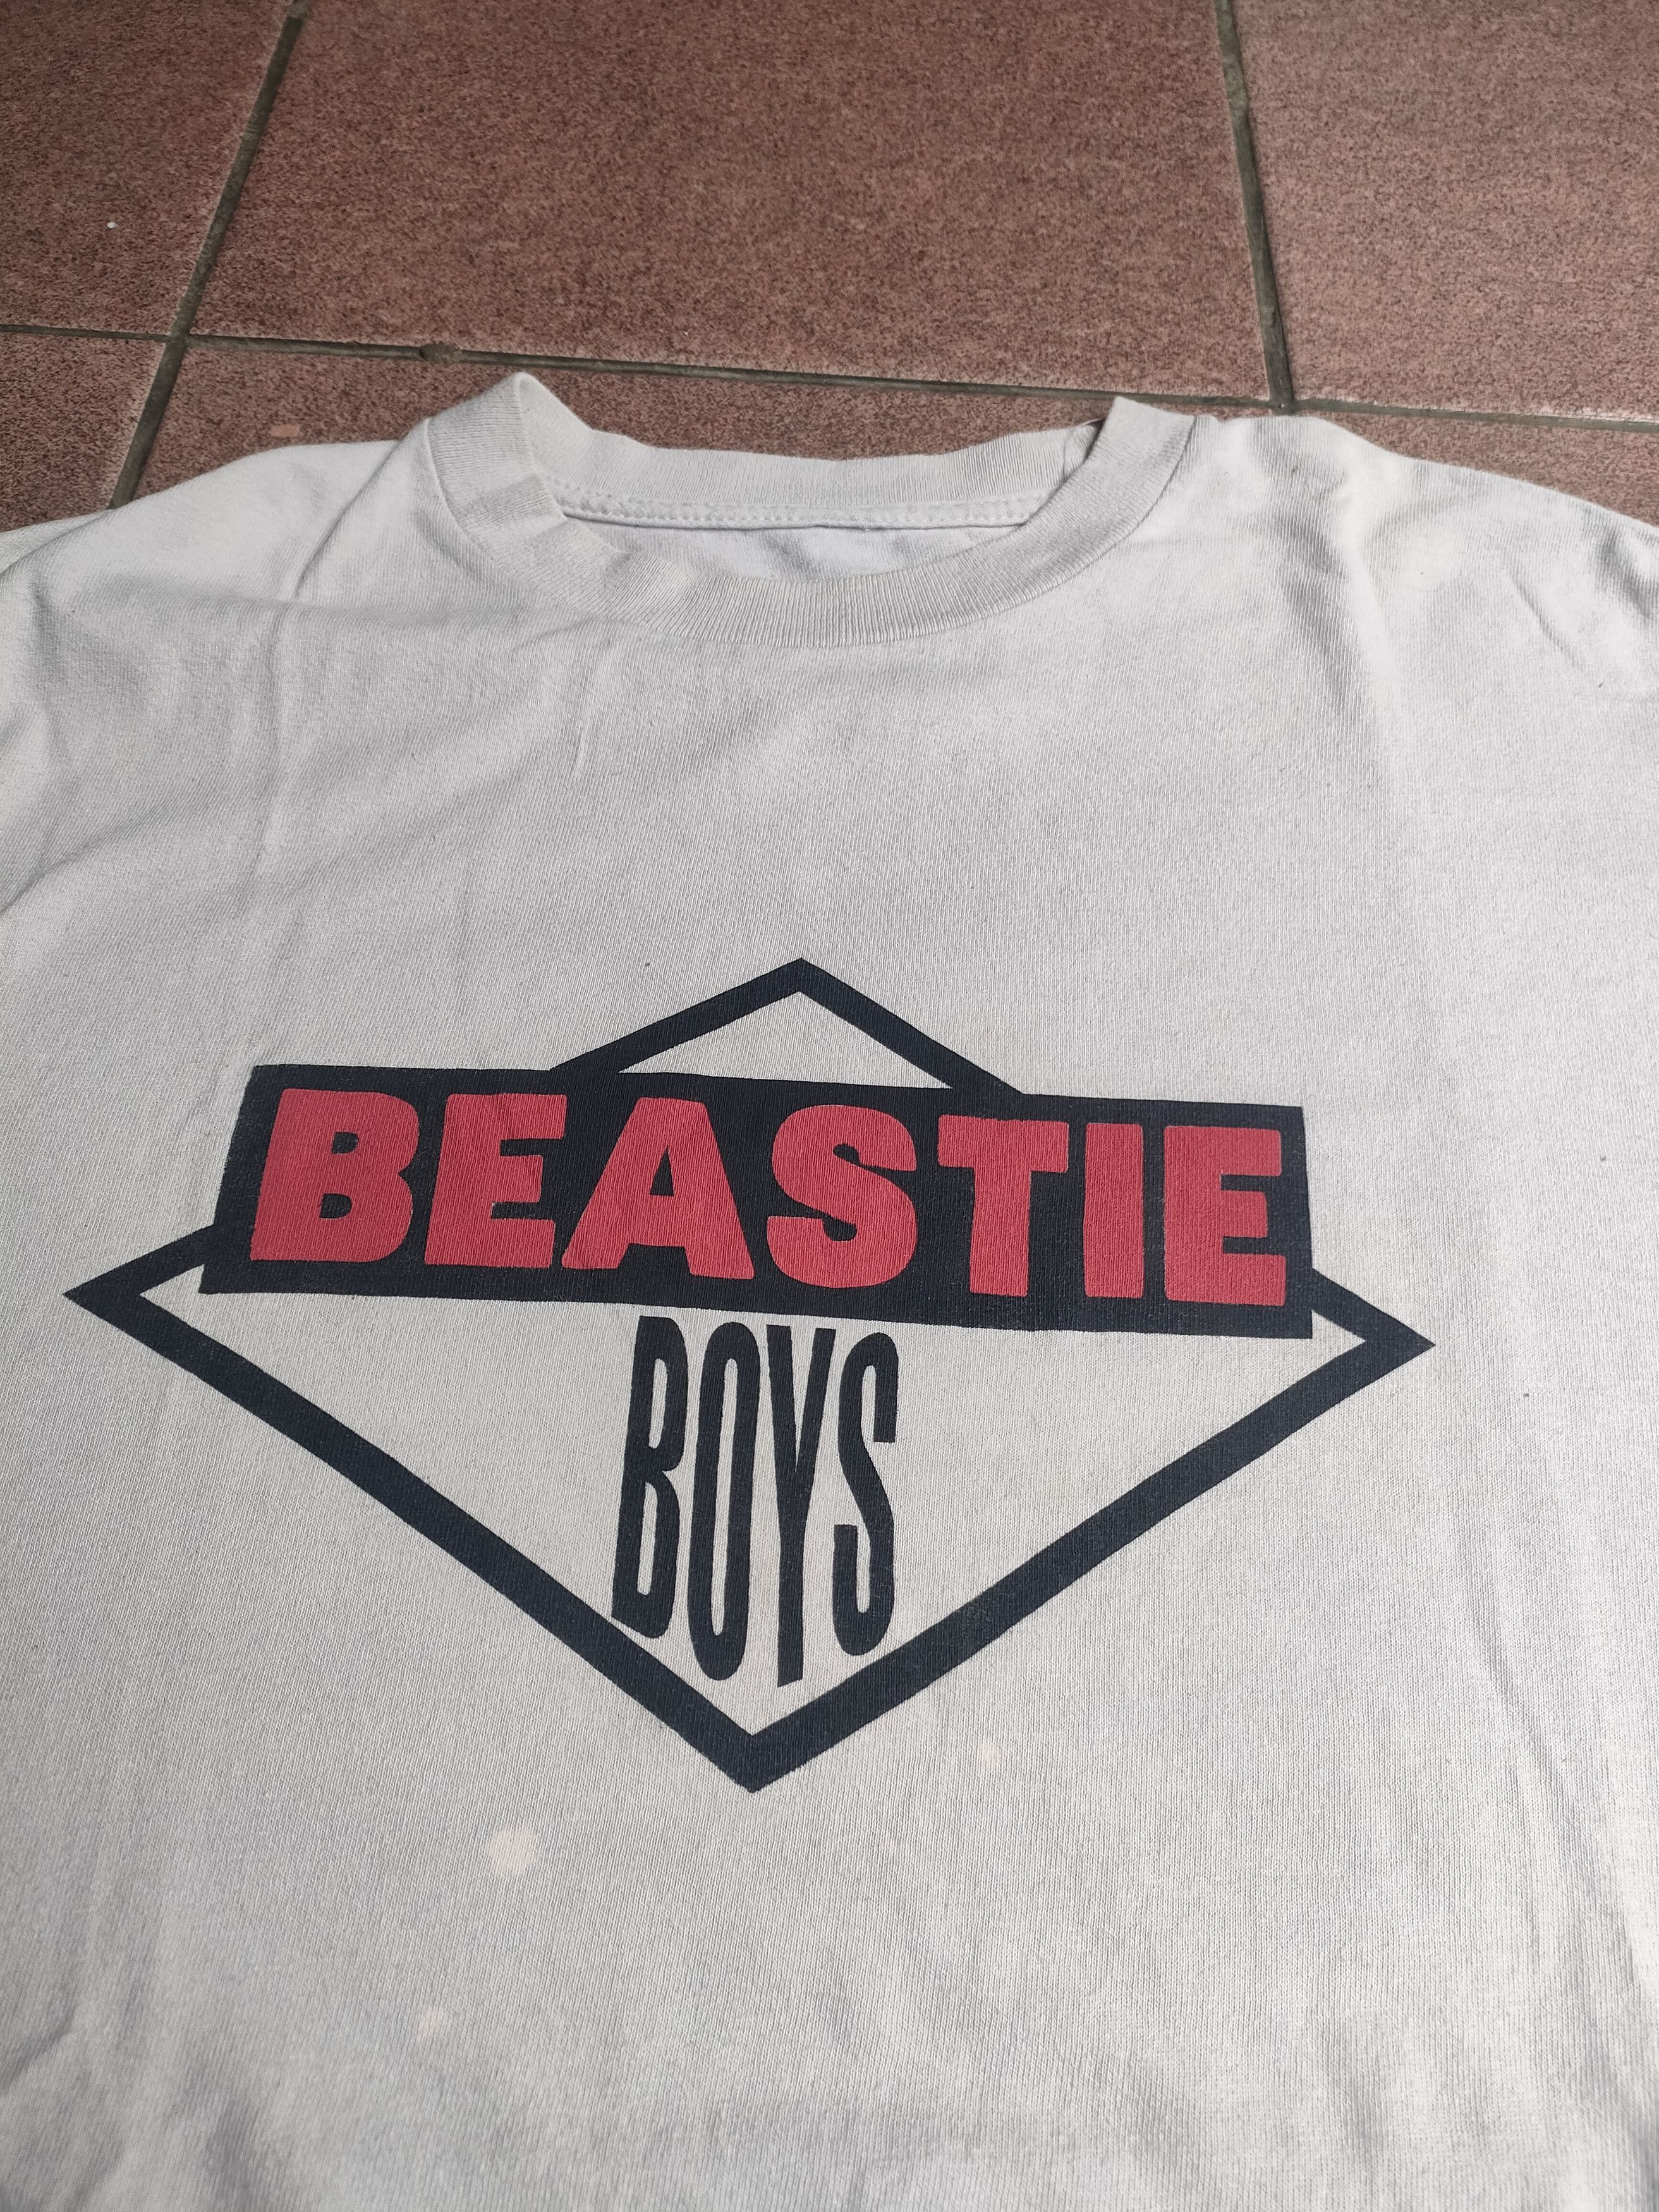 Vintage Beastie Boys - Licensed To ill Tour - Boot Tees - 3